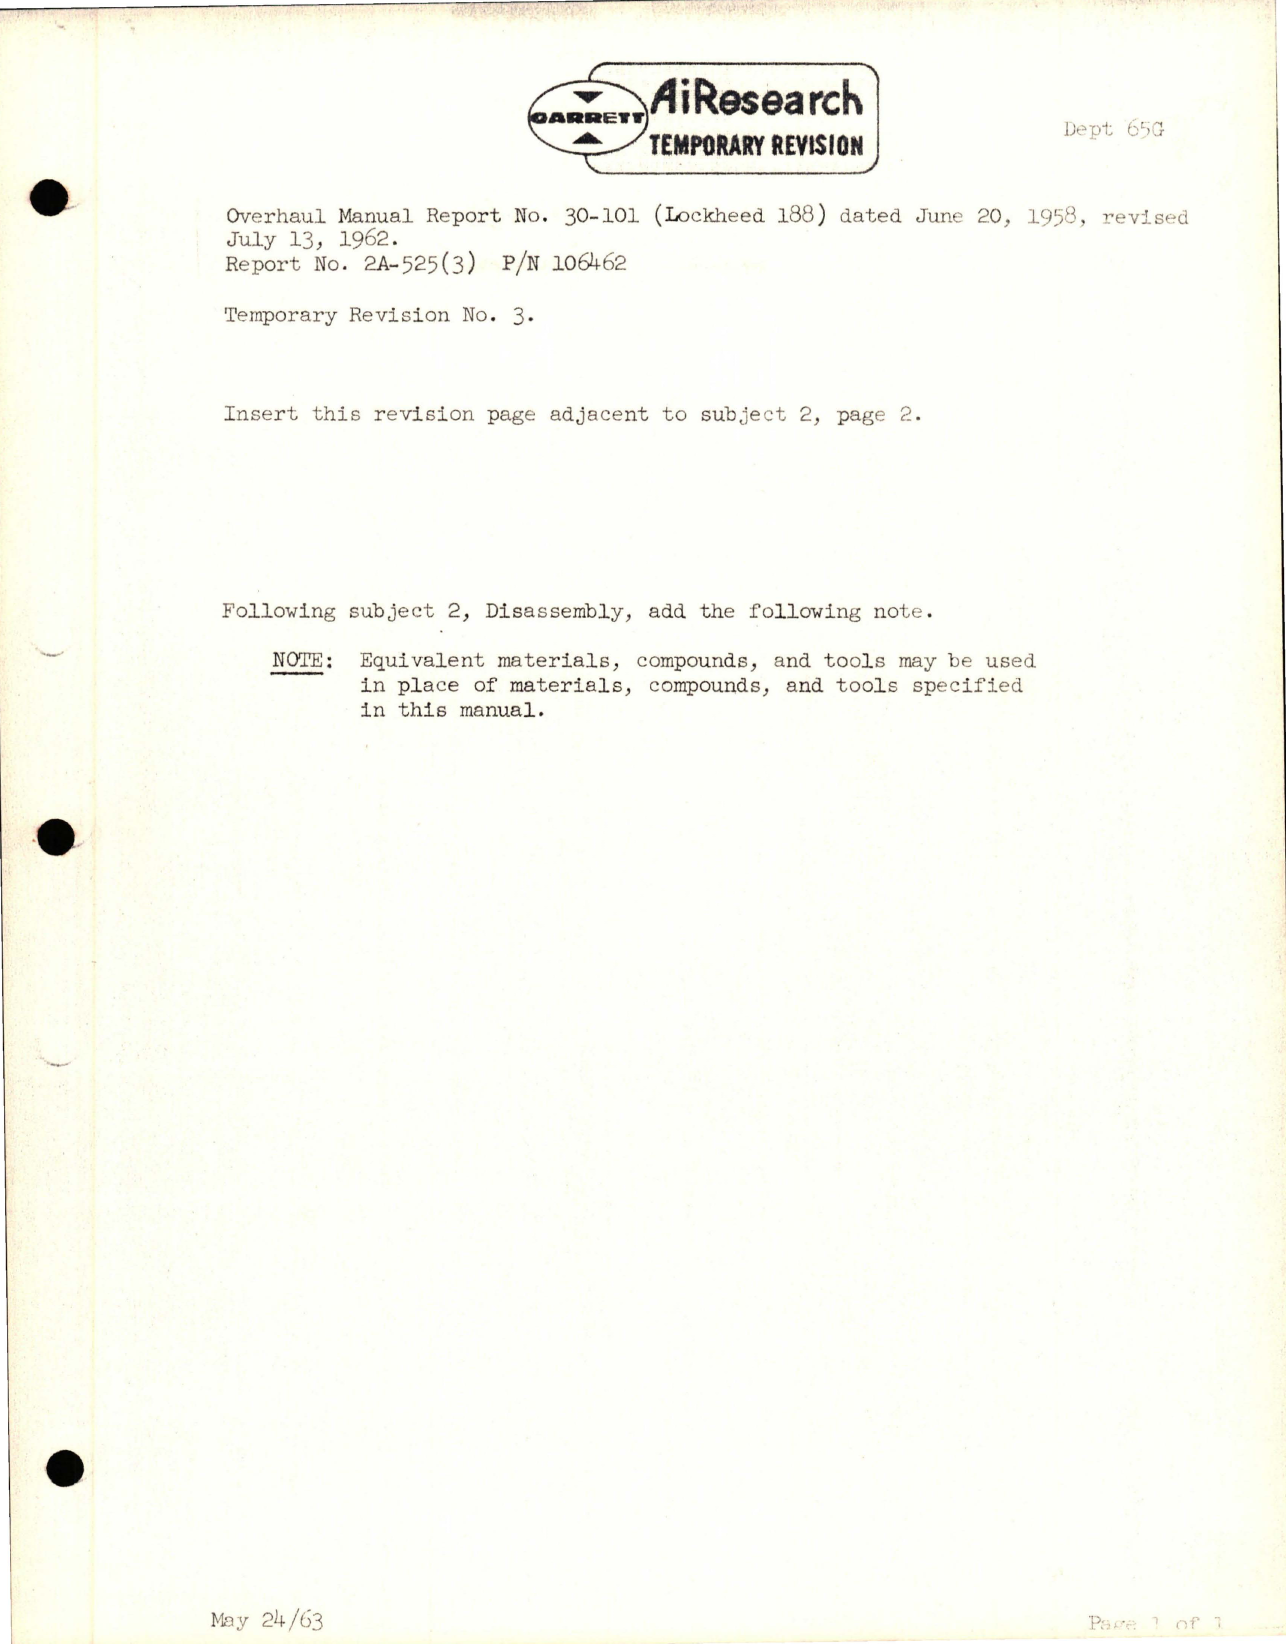 Sample page 5 from AirCorps Library document: Overhaul Manual for Two-Inch Diameter Pneumatic Shutoff Valve - Part 106462 